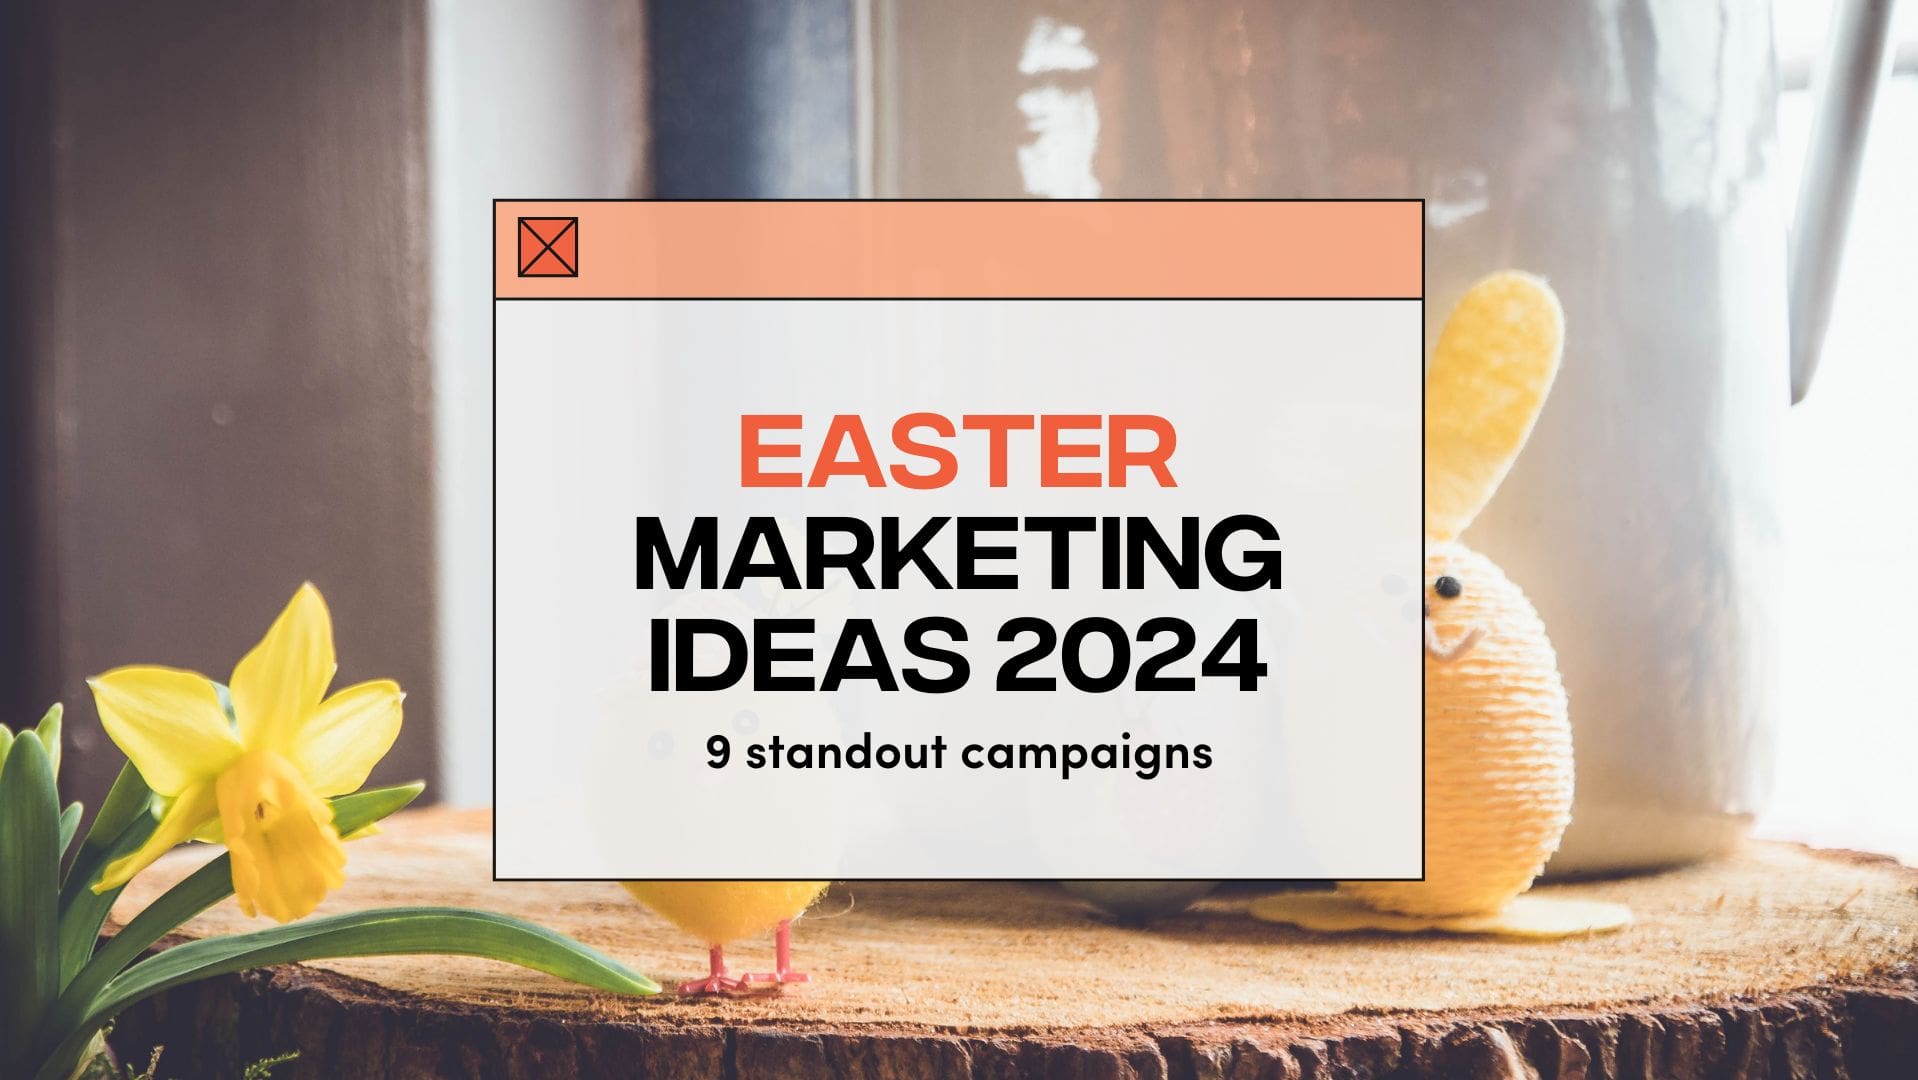 Easter Marketing Ideas 2024: Nine Standout Campaigns